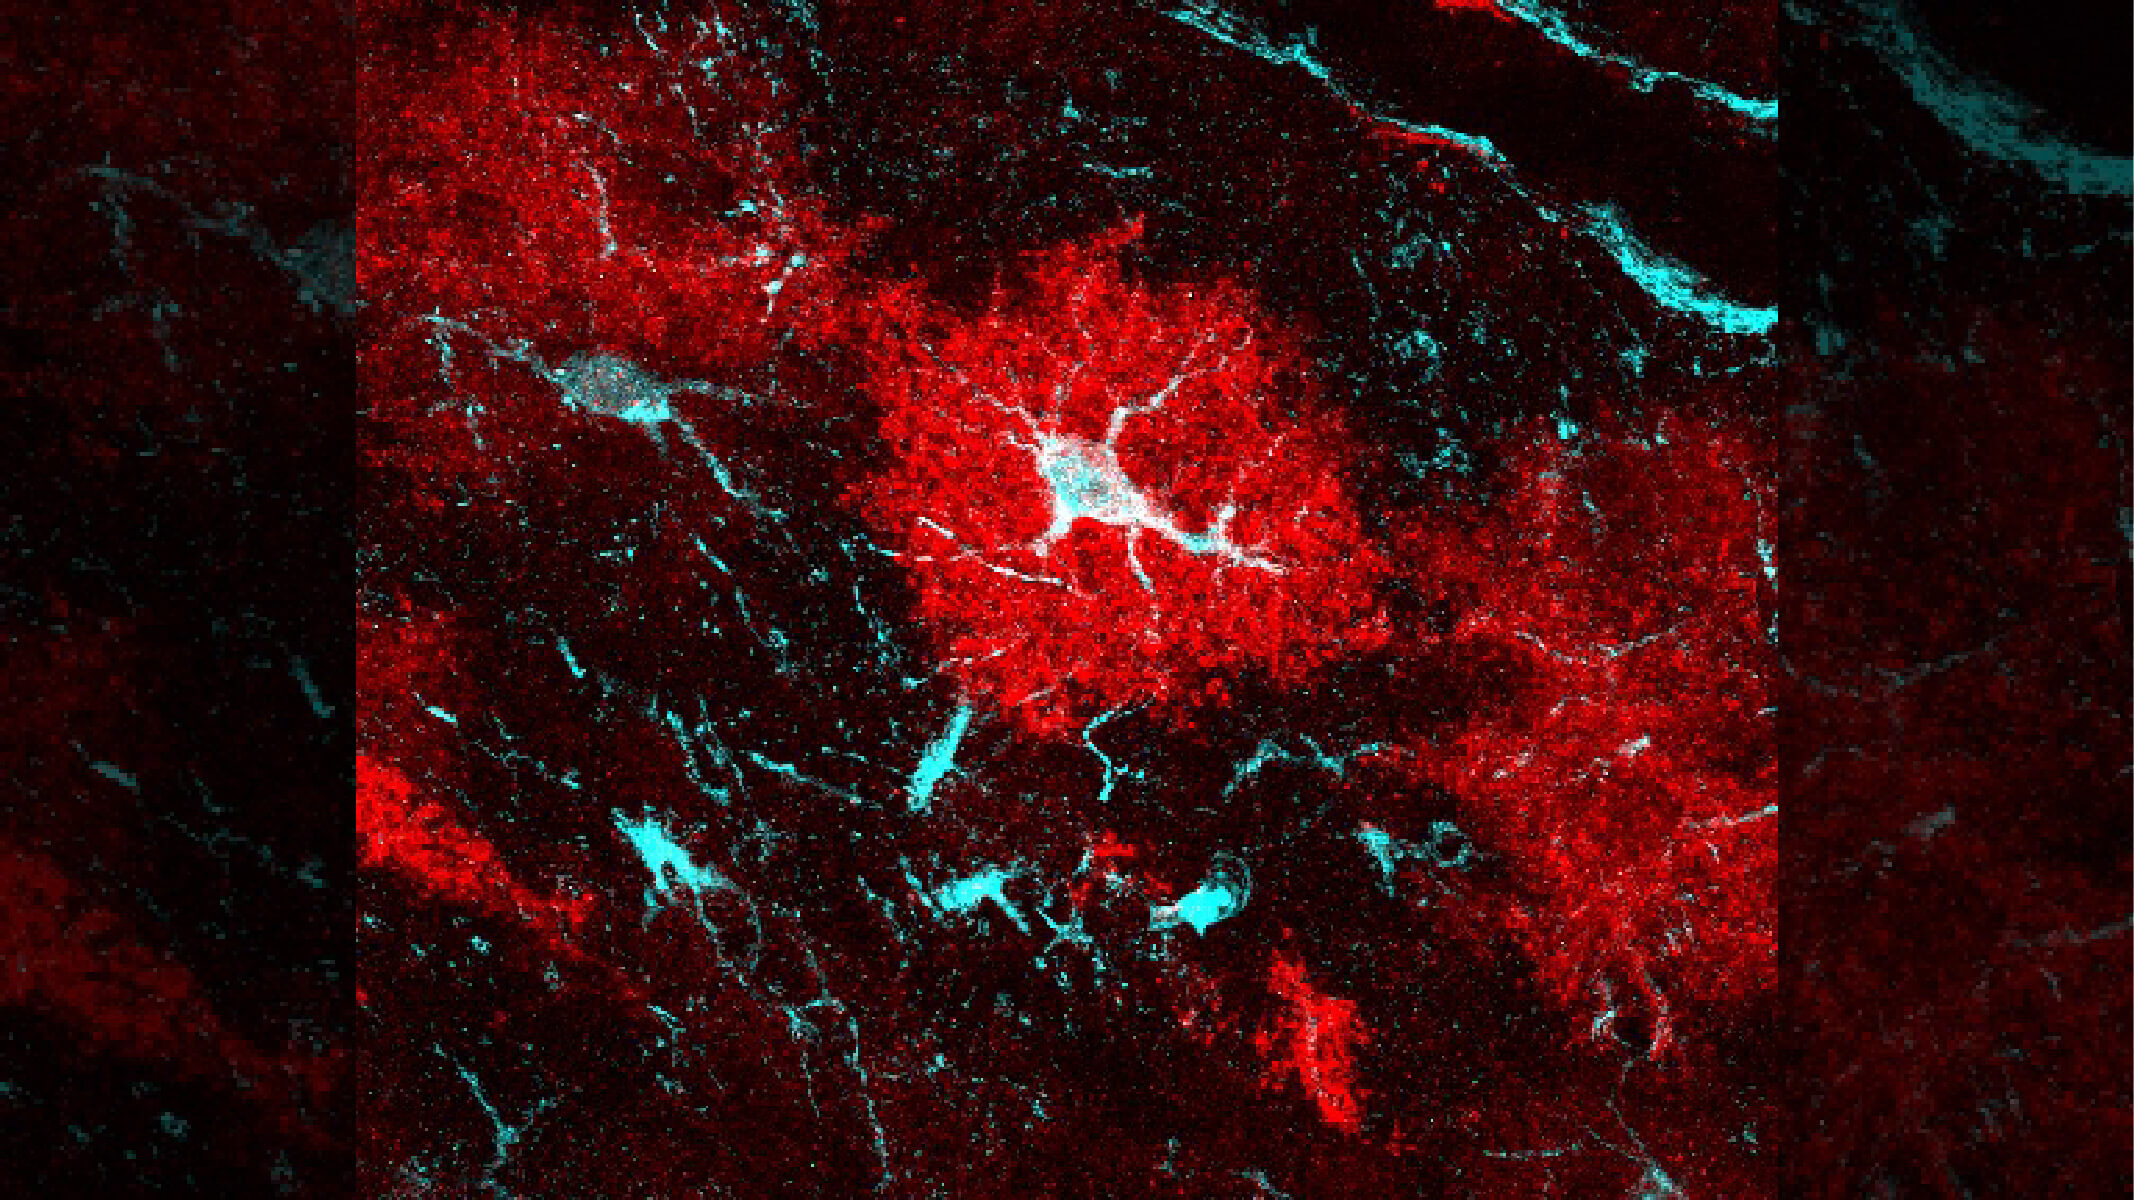 Astrocytes, shown here in red and light blue, in a brain region known as the striatum. These cells in this structure were found to play a key role in brain disease in a mouse model of Huntington’s disease. Image courtesy of Baljit Khakh, Ph.D. 